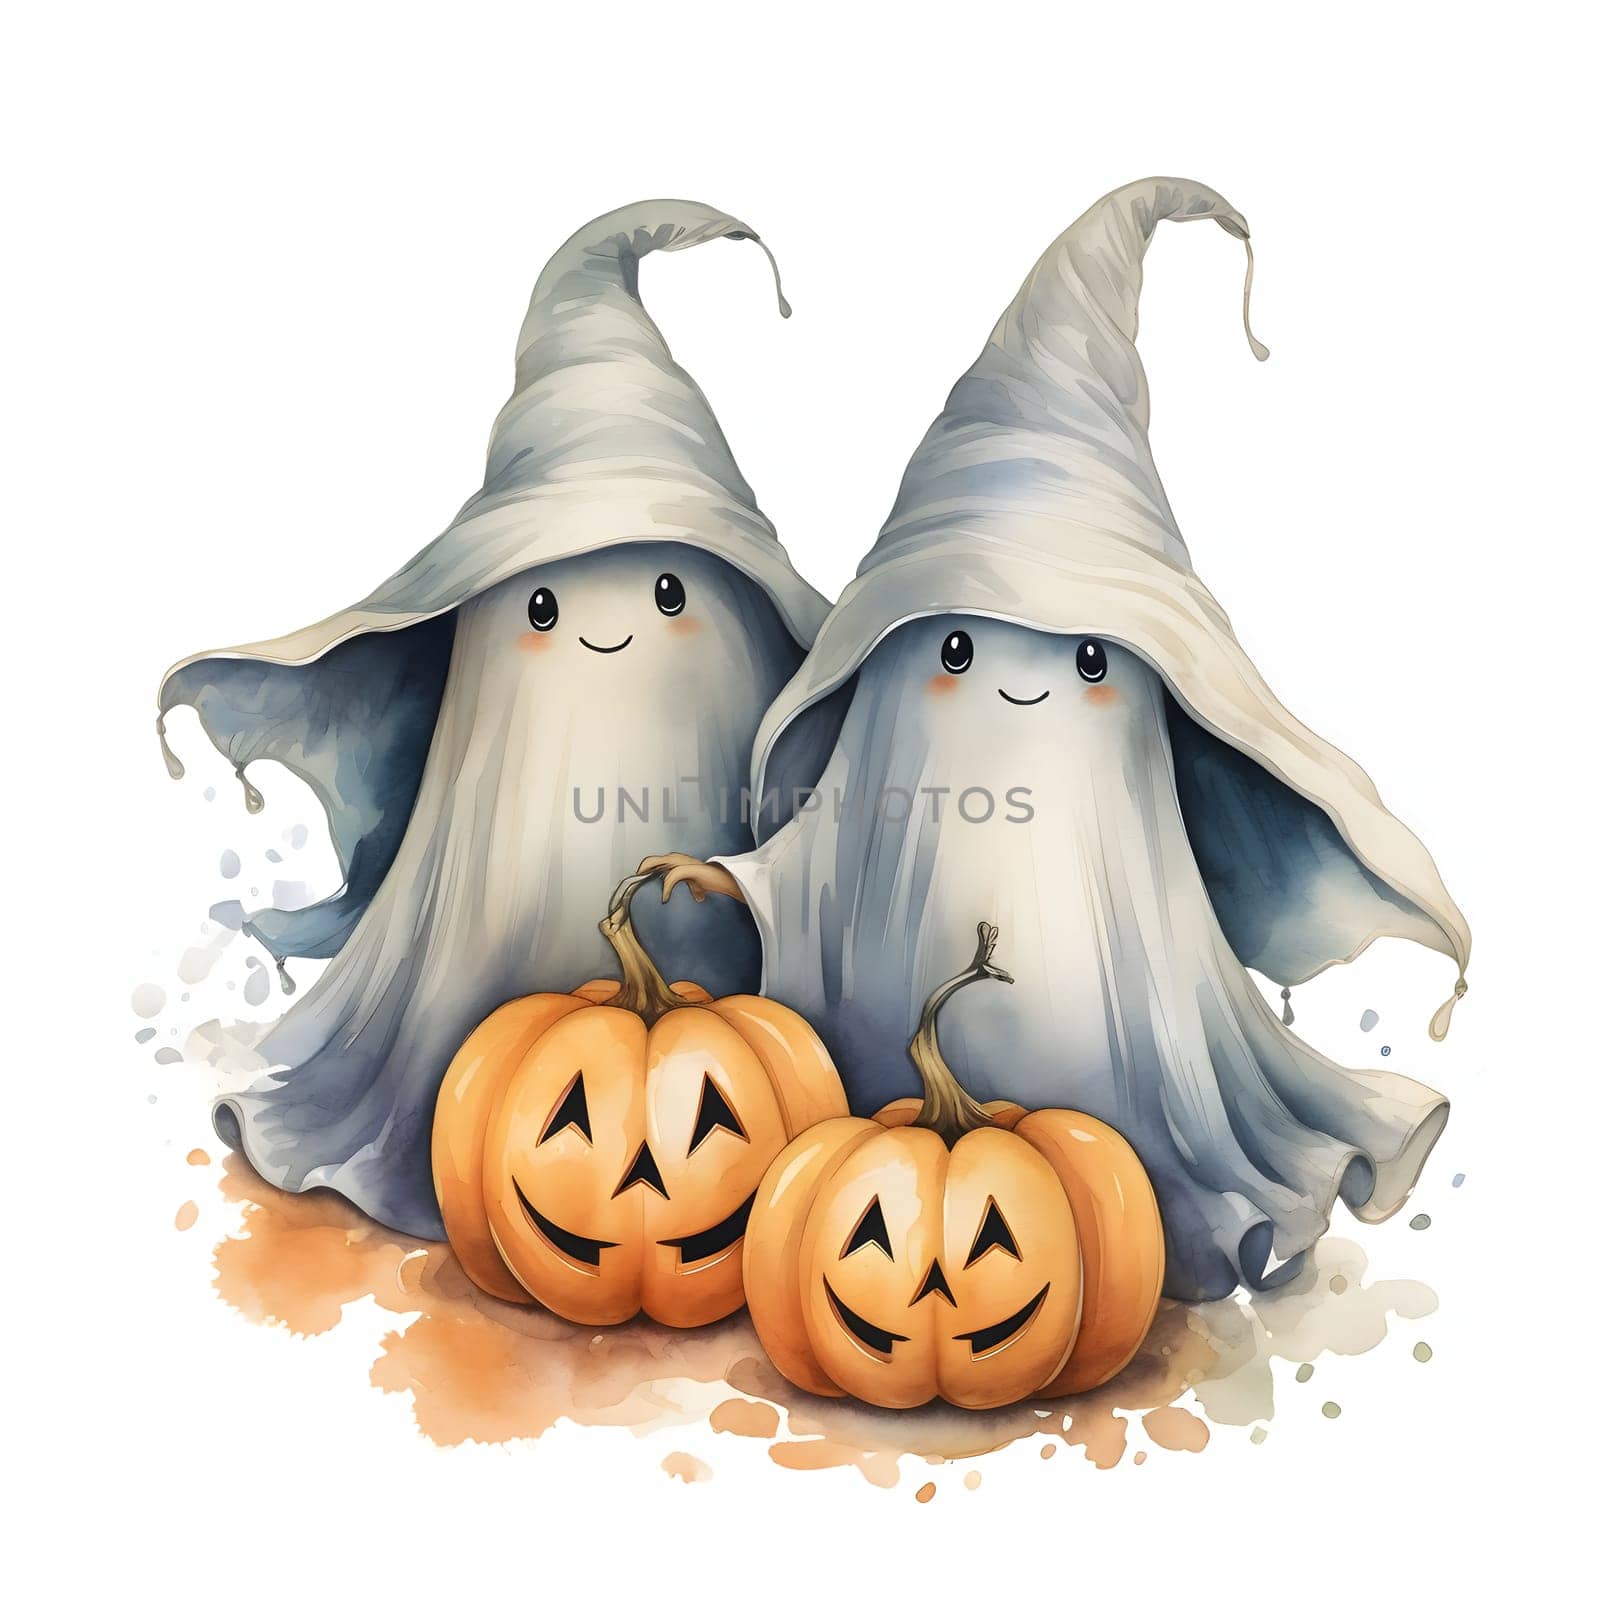 Two ghosts in hats and two jack-o-lantern pumpkins, Halloween image on a white isolated background. by ThemesS